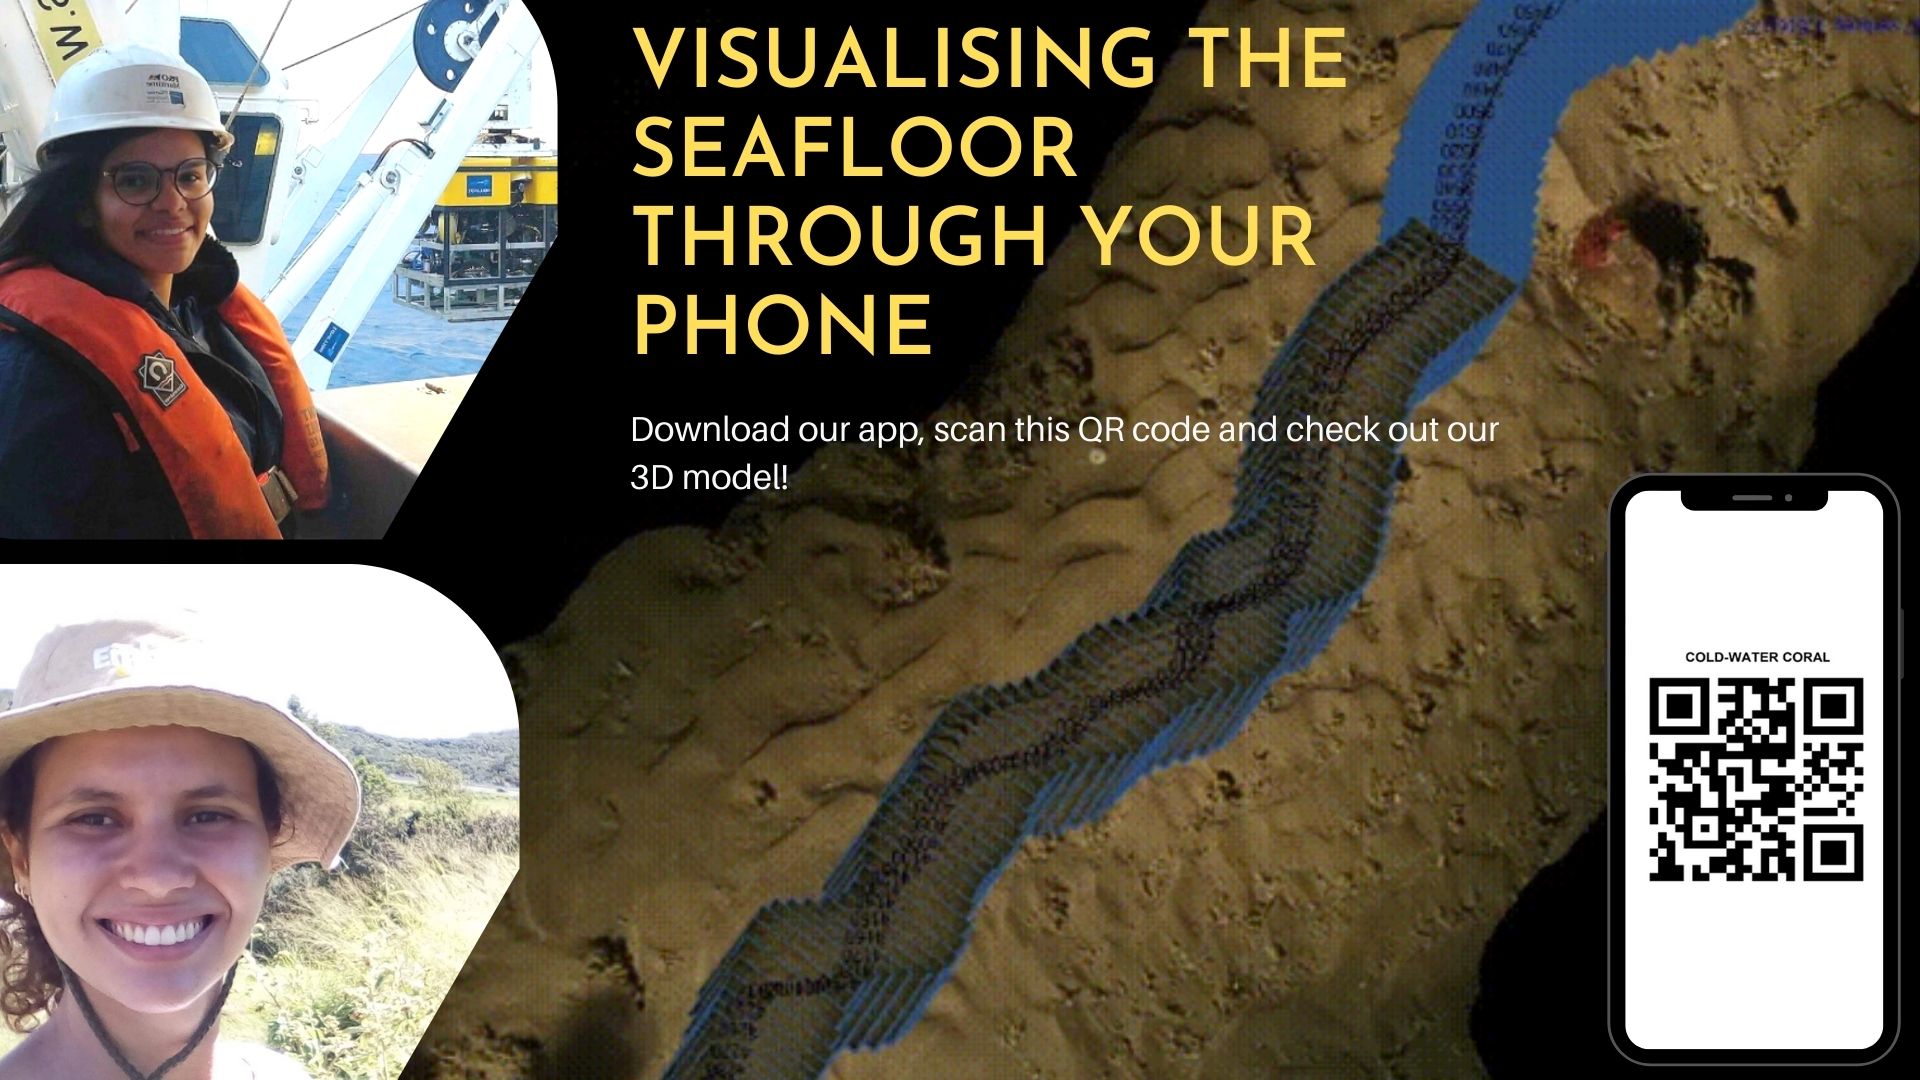 Visualising the Seafloor Through Your Phone (INTERACTIVE)
